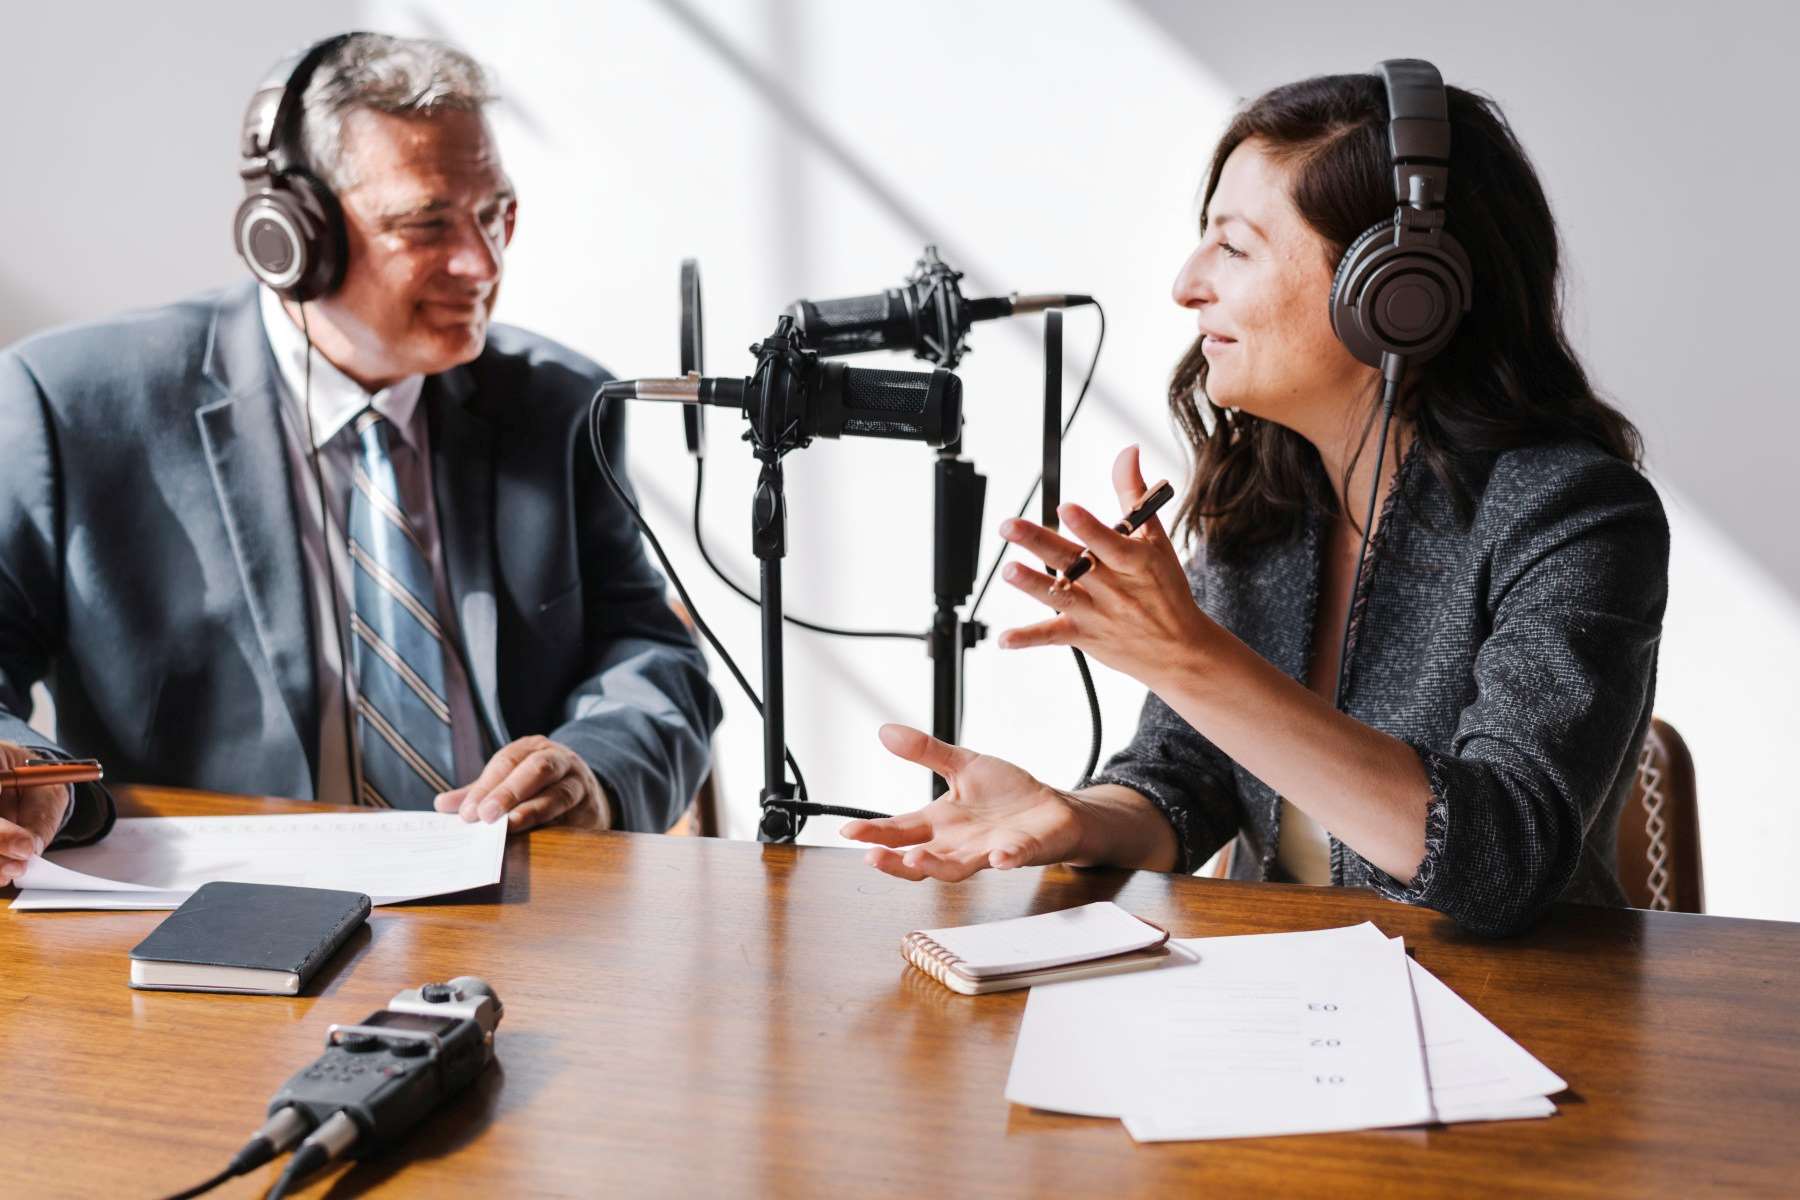 15 Best Business Podcasts For Professionals